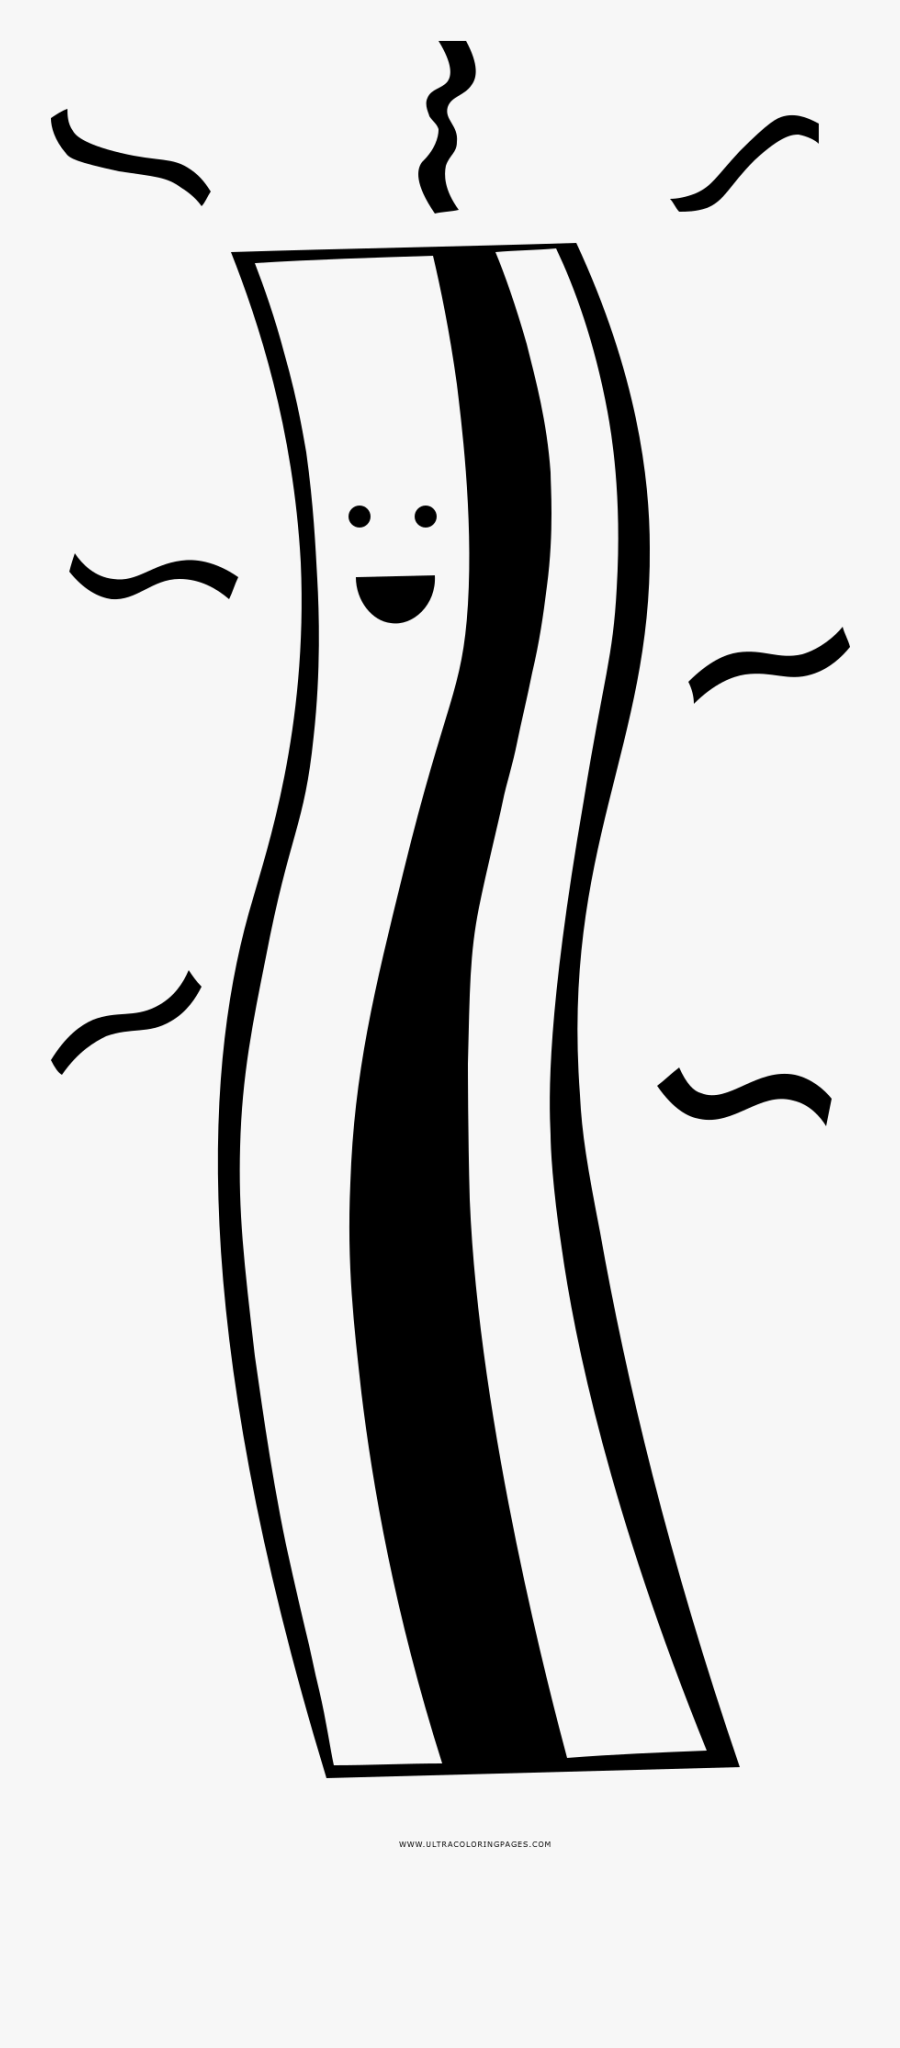 Sizzling Bacon Coloring Page - Bacon Coloring Pages, Transparent Clipart